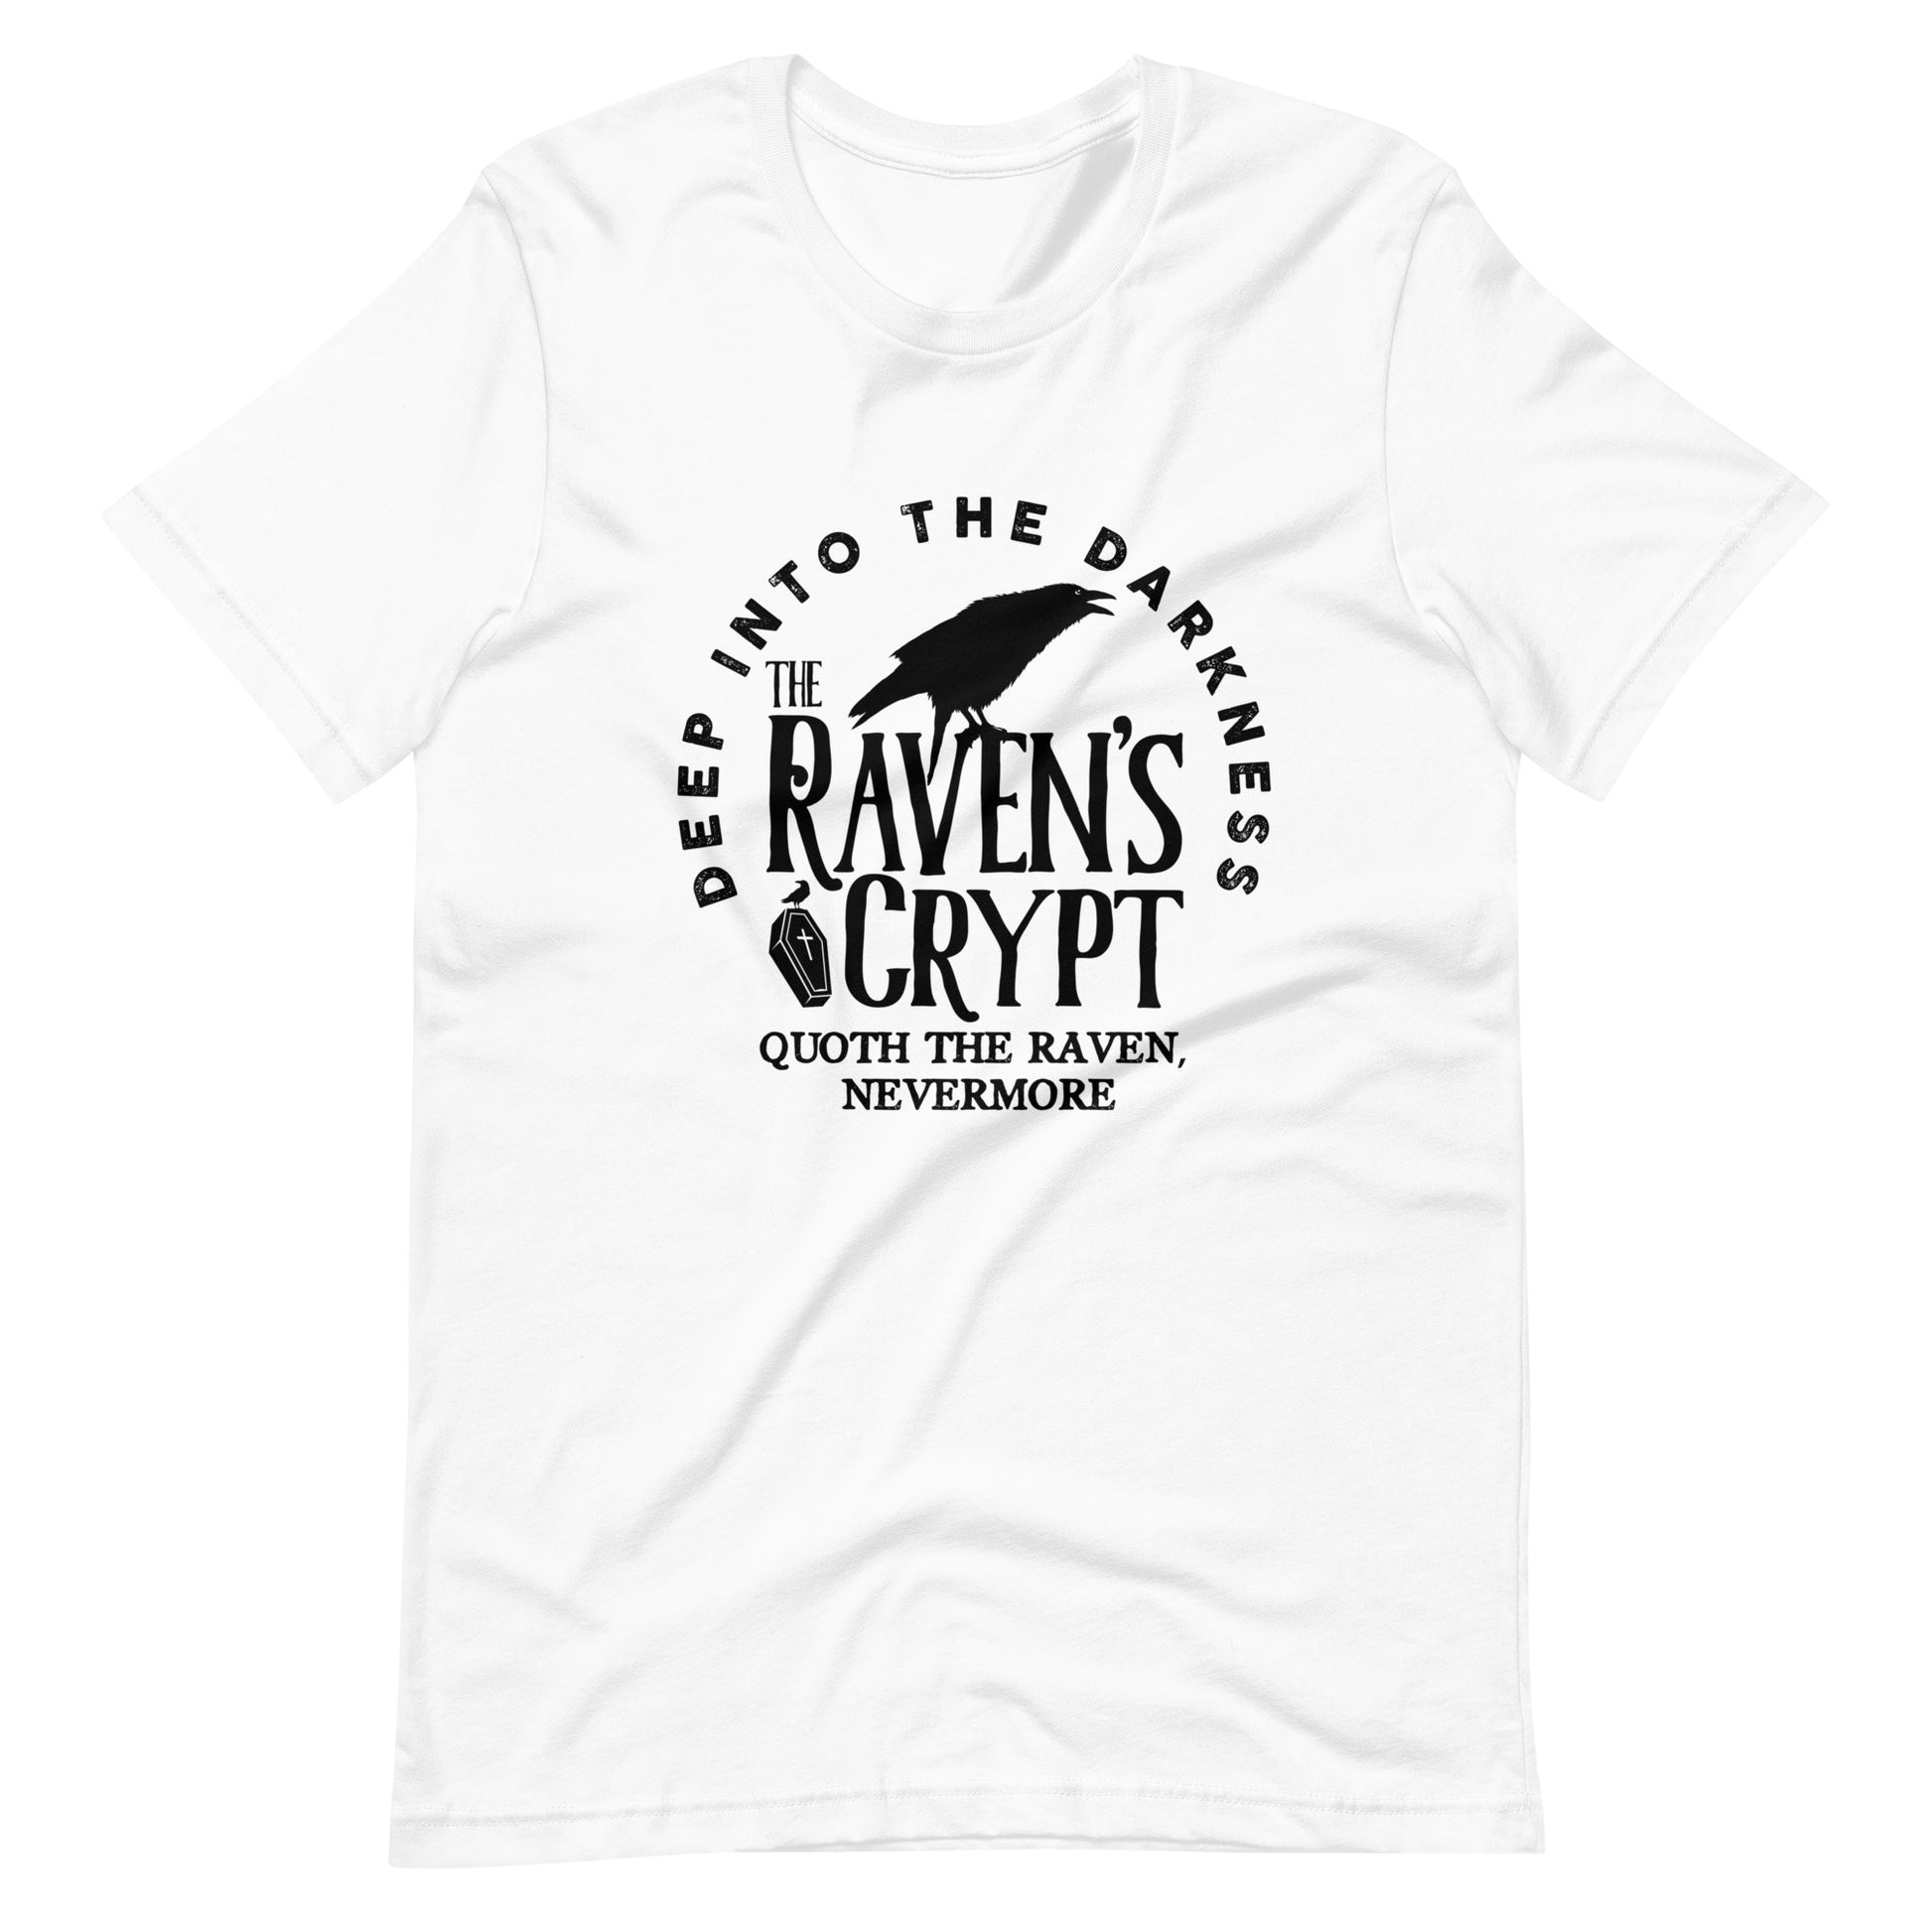 Deep Into the Darkness The Raven's Crypt - Men's t-shirt - White Front